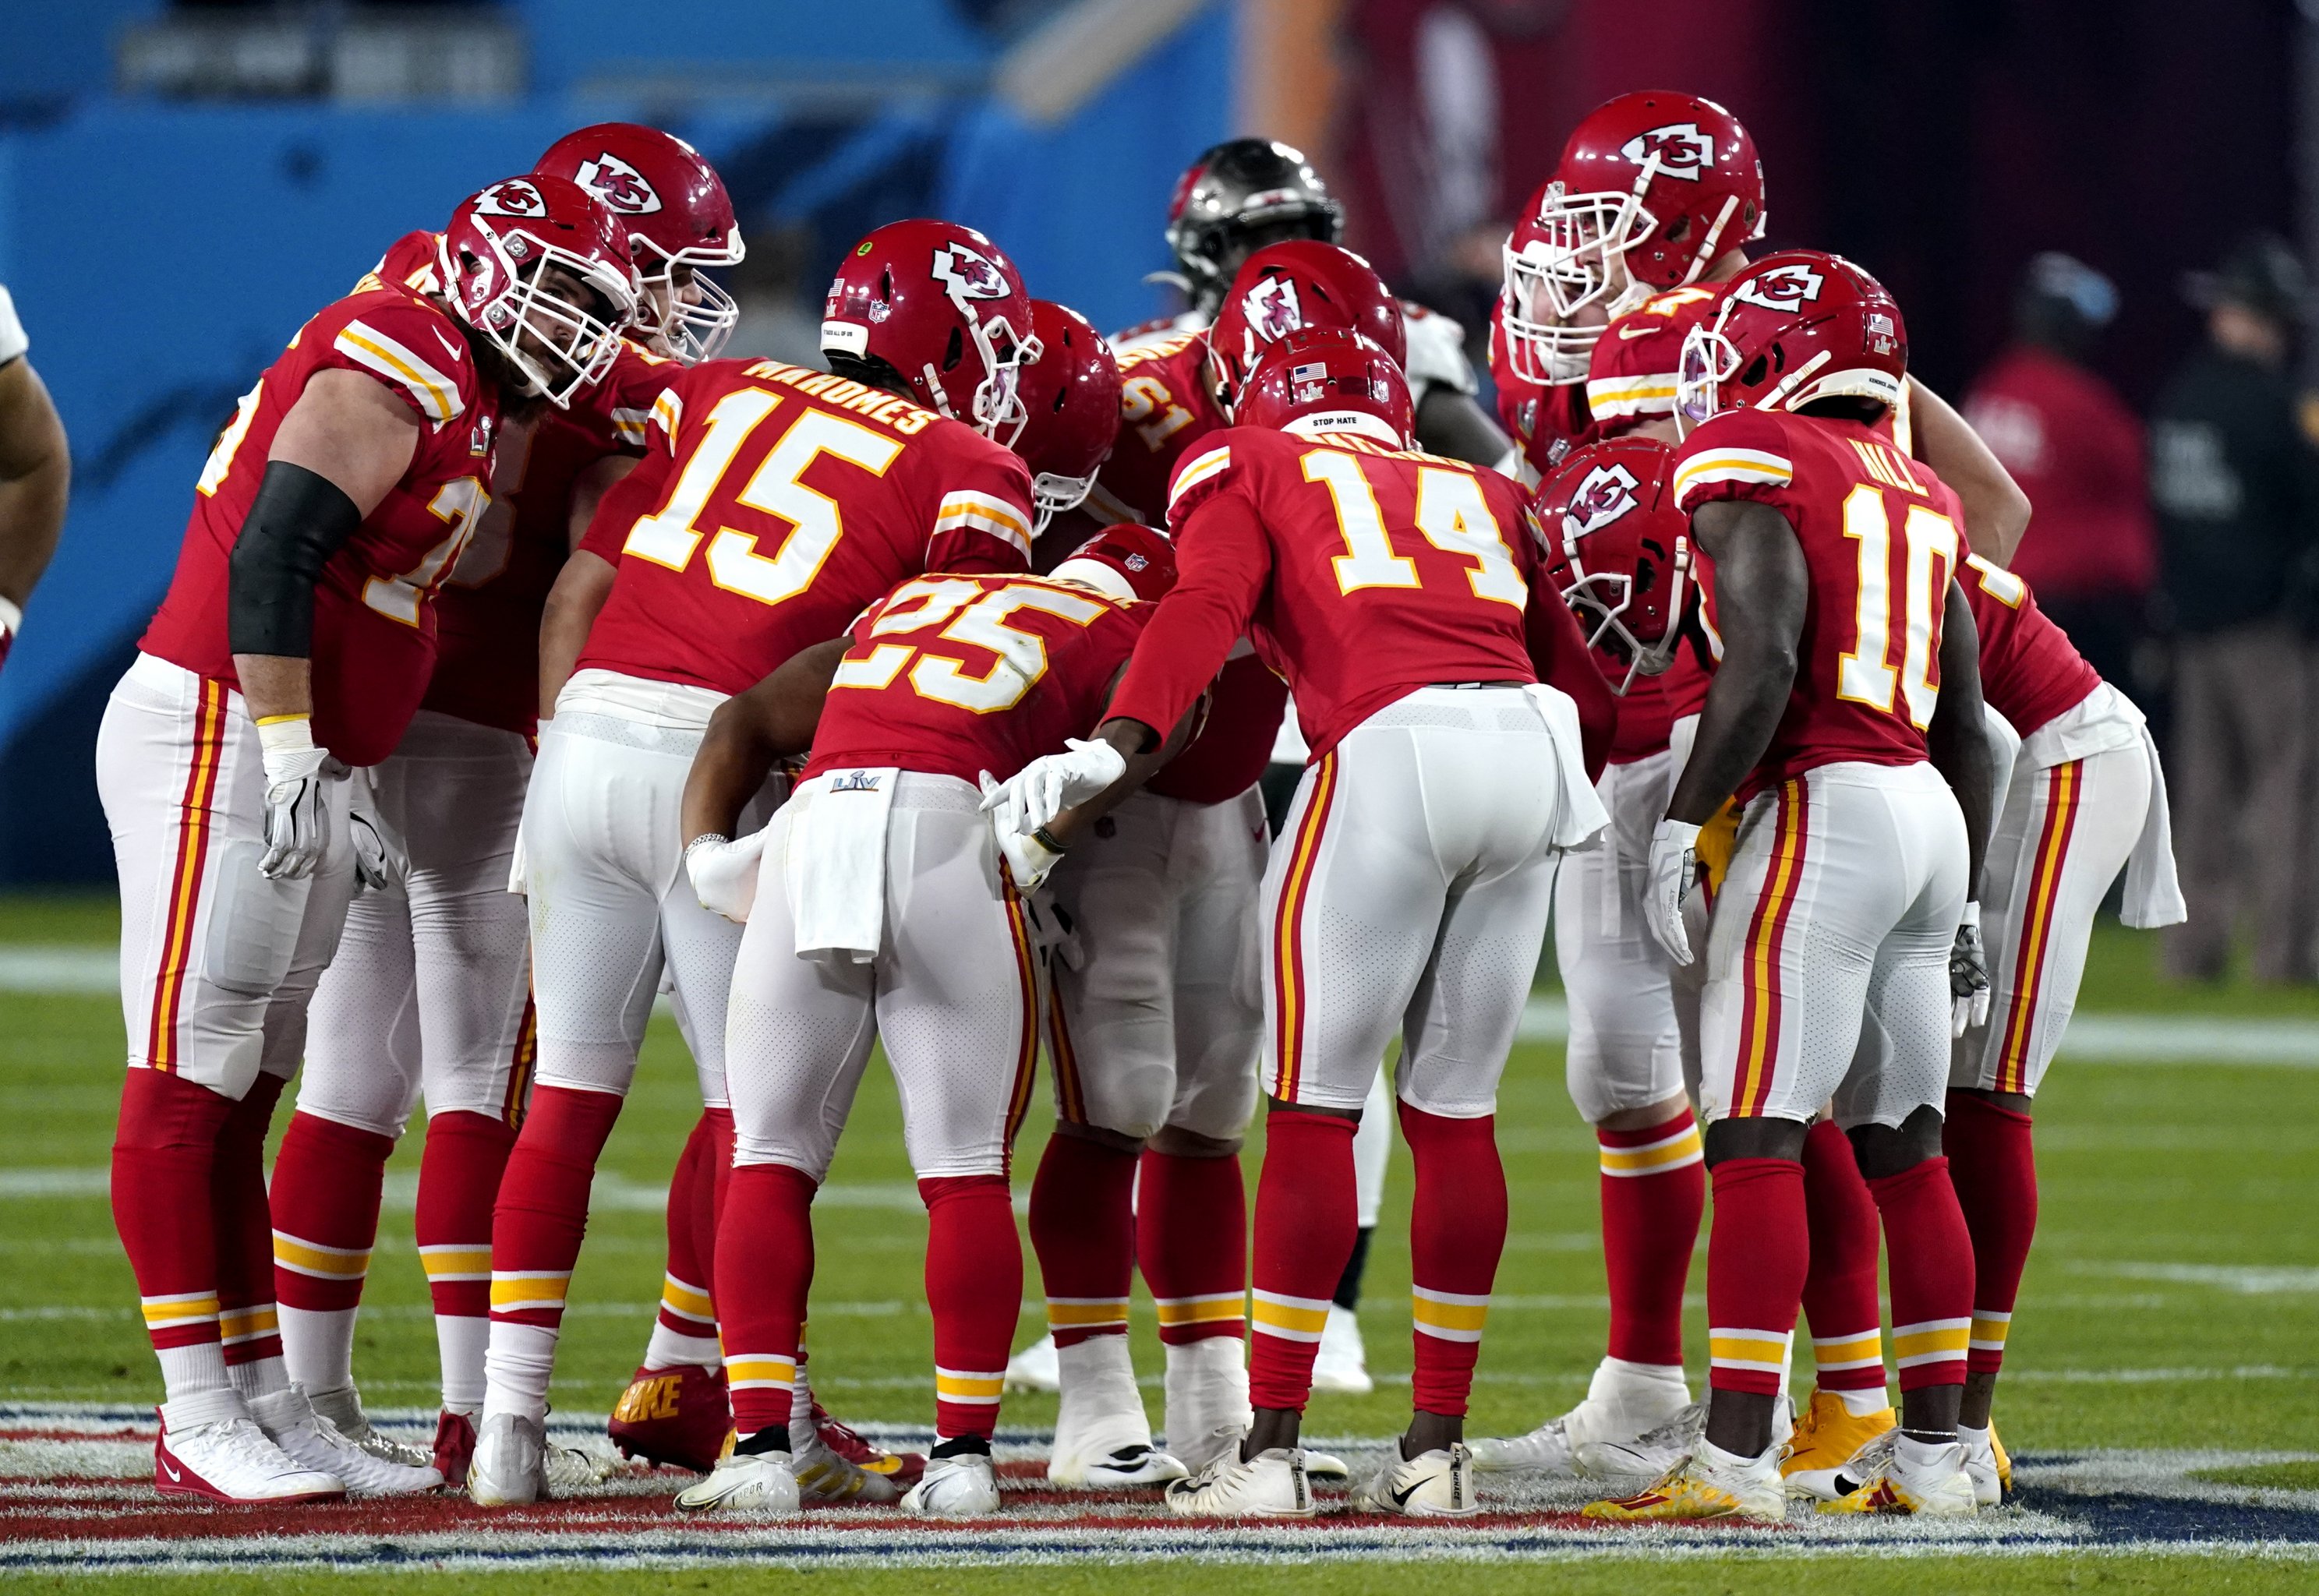 2021 Kansas City Chiefs' schedule with dates, times and locations